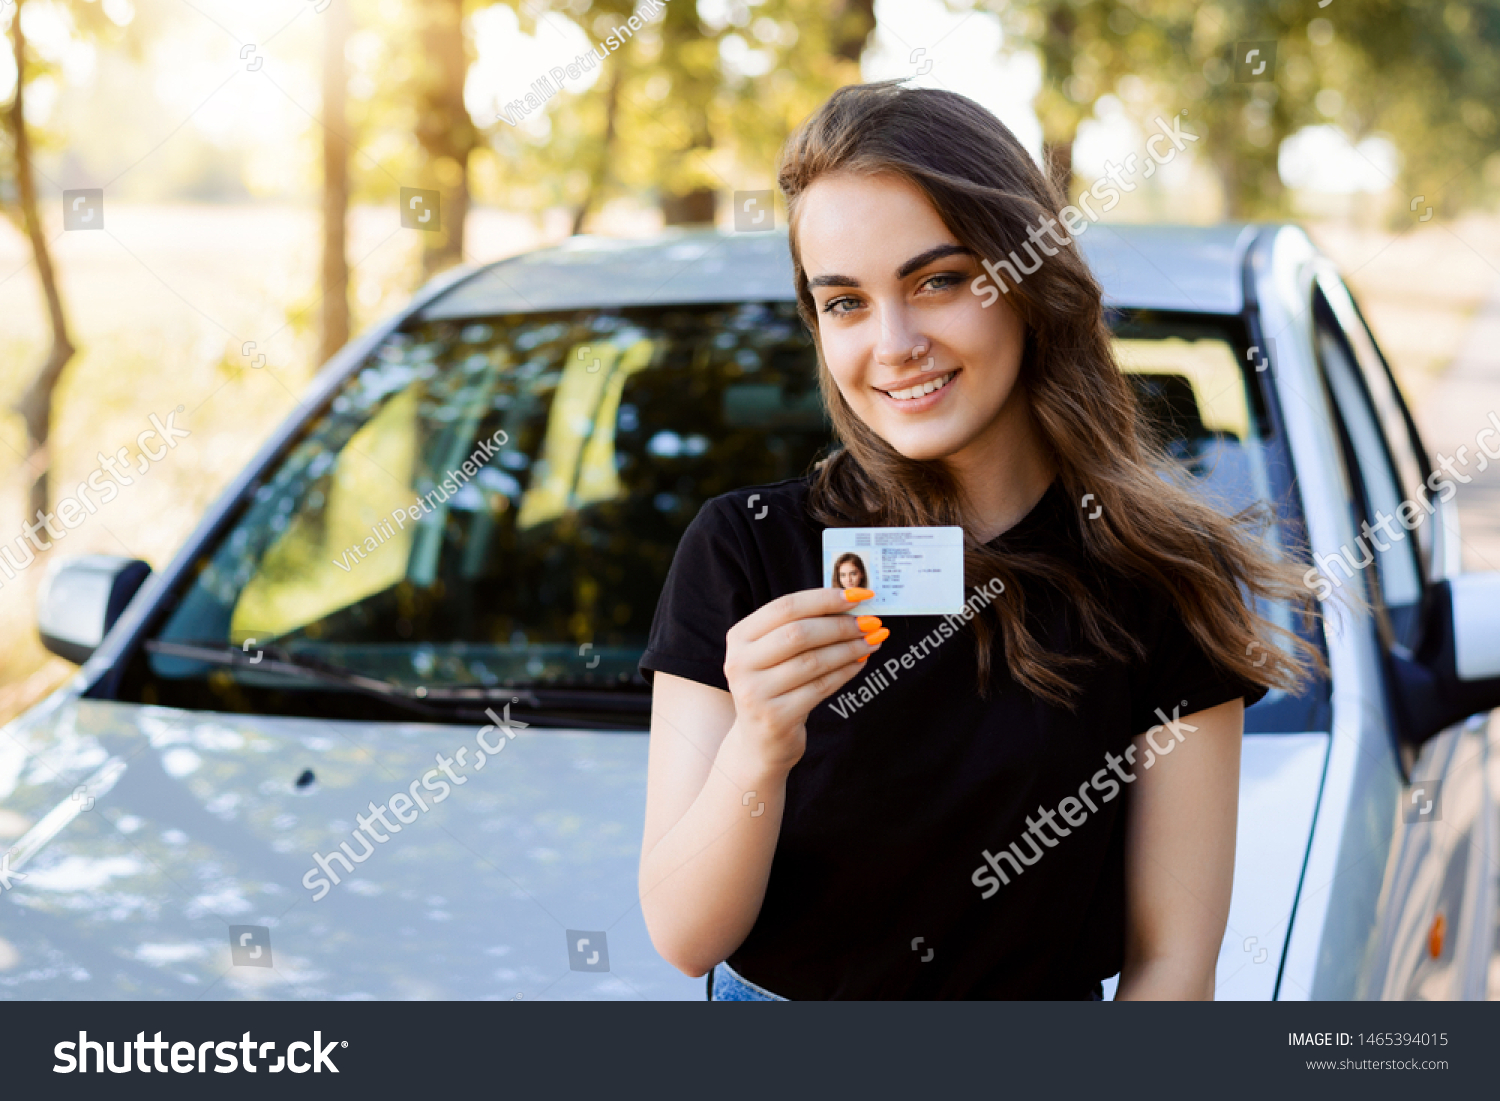 Attractive young woman wearing black T-shirt standing in front of modern car bragging about receiving driving license showing licence to the camera and feeling happy #1465394015